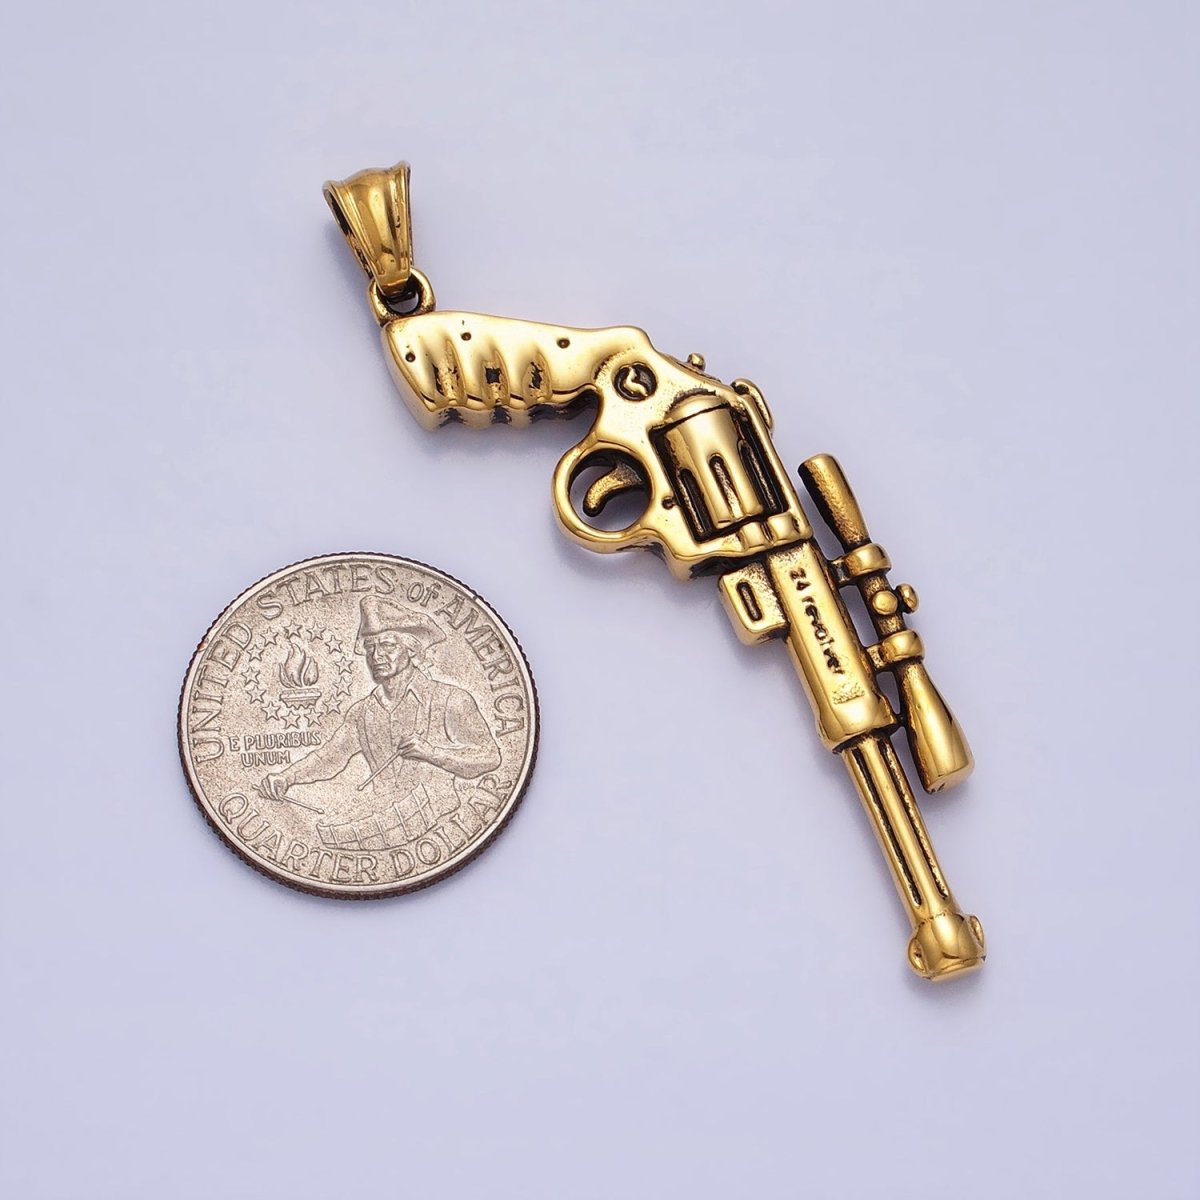 Stainless Steel Revolver Rifle Gun Weapon Pendant in Gold & Silver P-1147 - DLUXCA